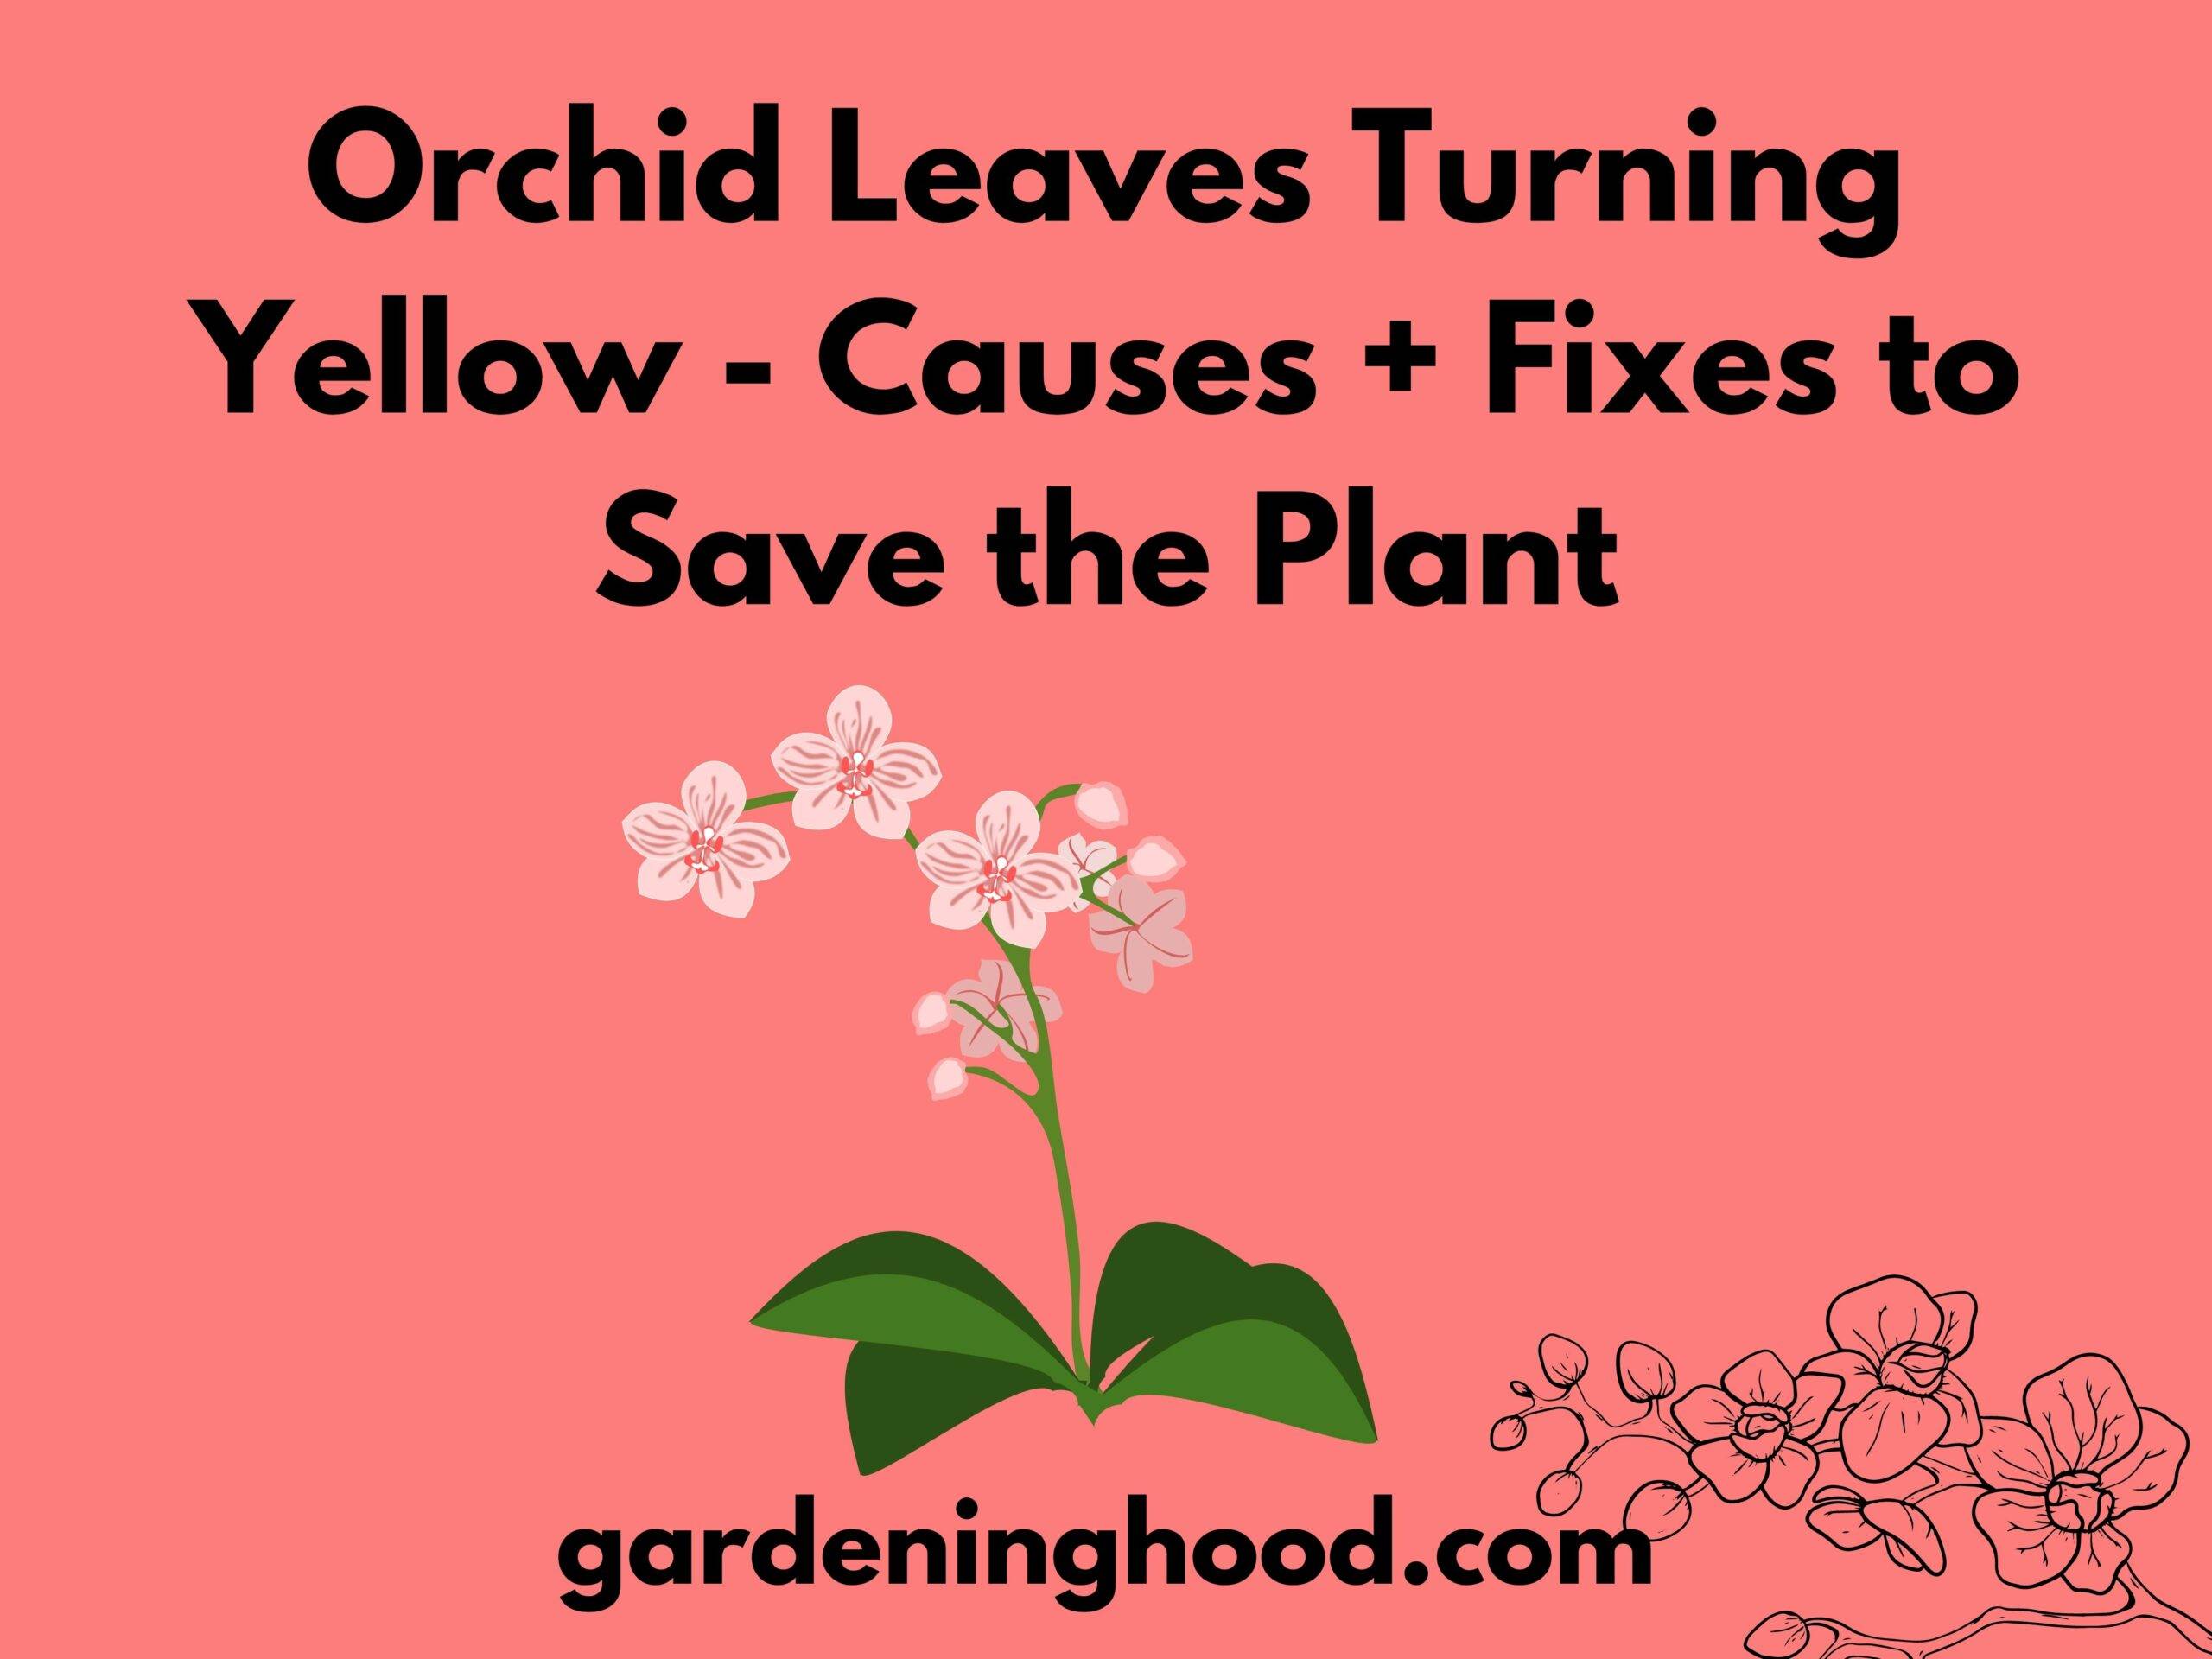 Orchid Leaves Turning Yellow - Causes + Fixes to Save the Plant